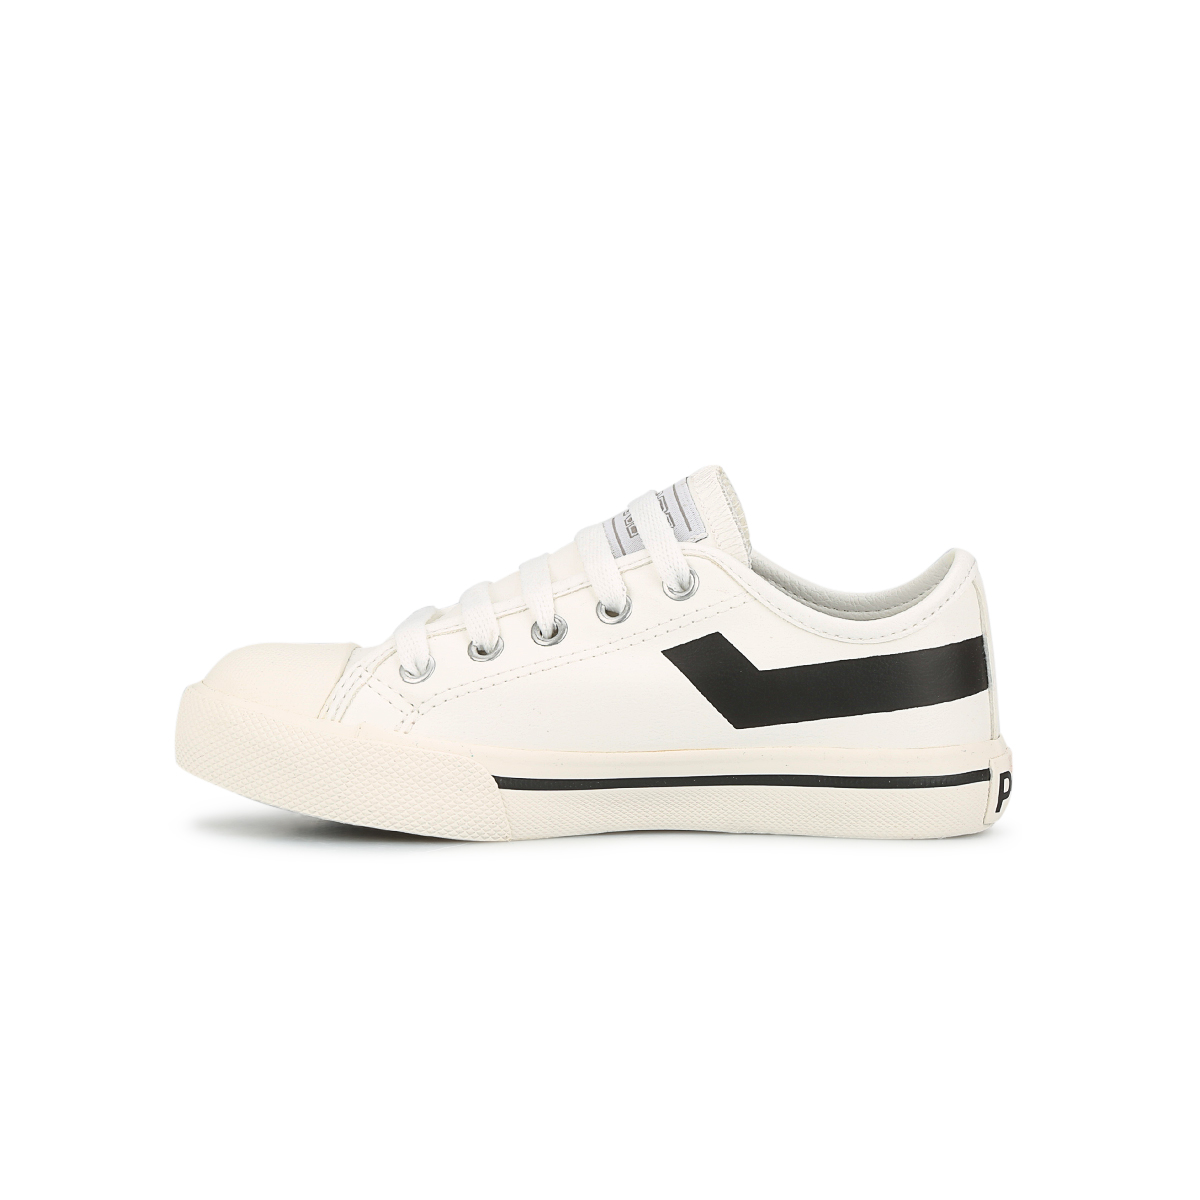 Zapatillas Pony Shooter Ox New Pele,  image number null